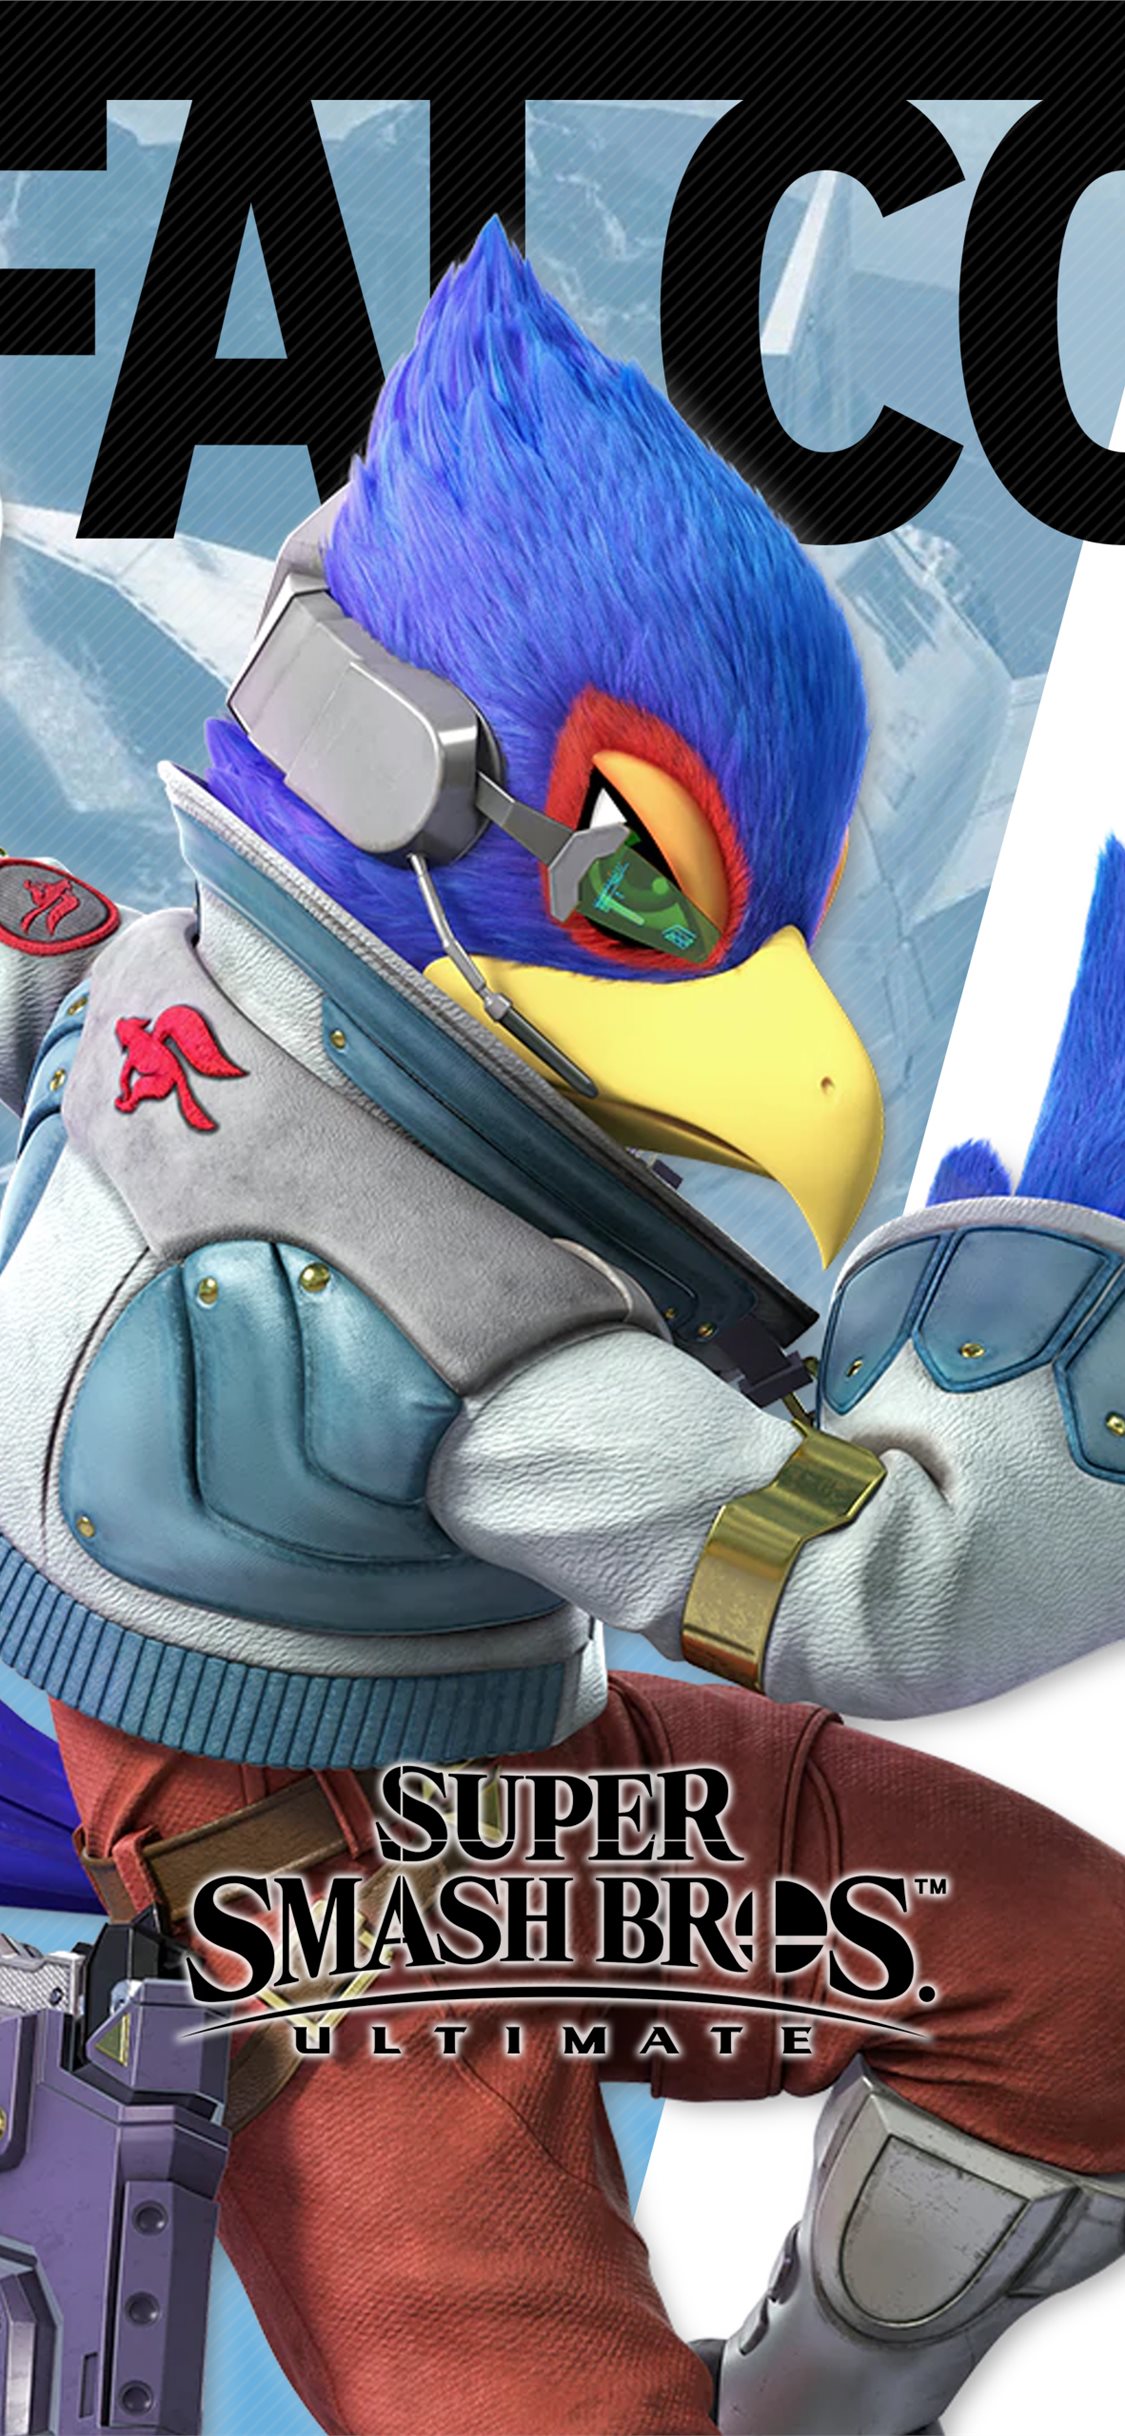 Super smash bros ultimate falco wallpapers iphone x wallpapers free download